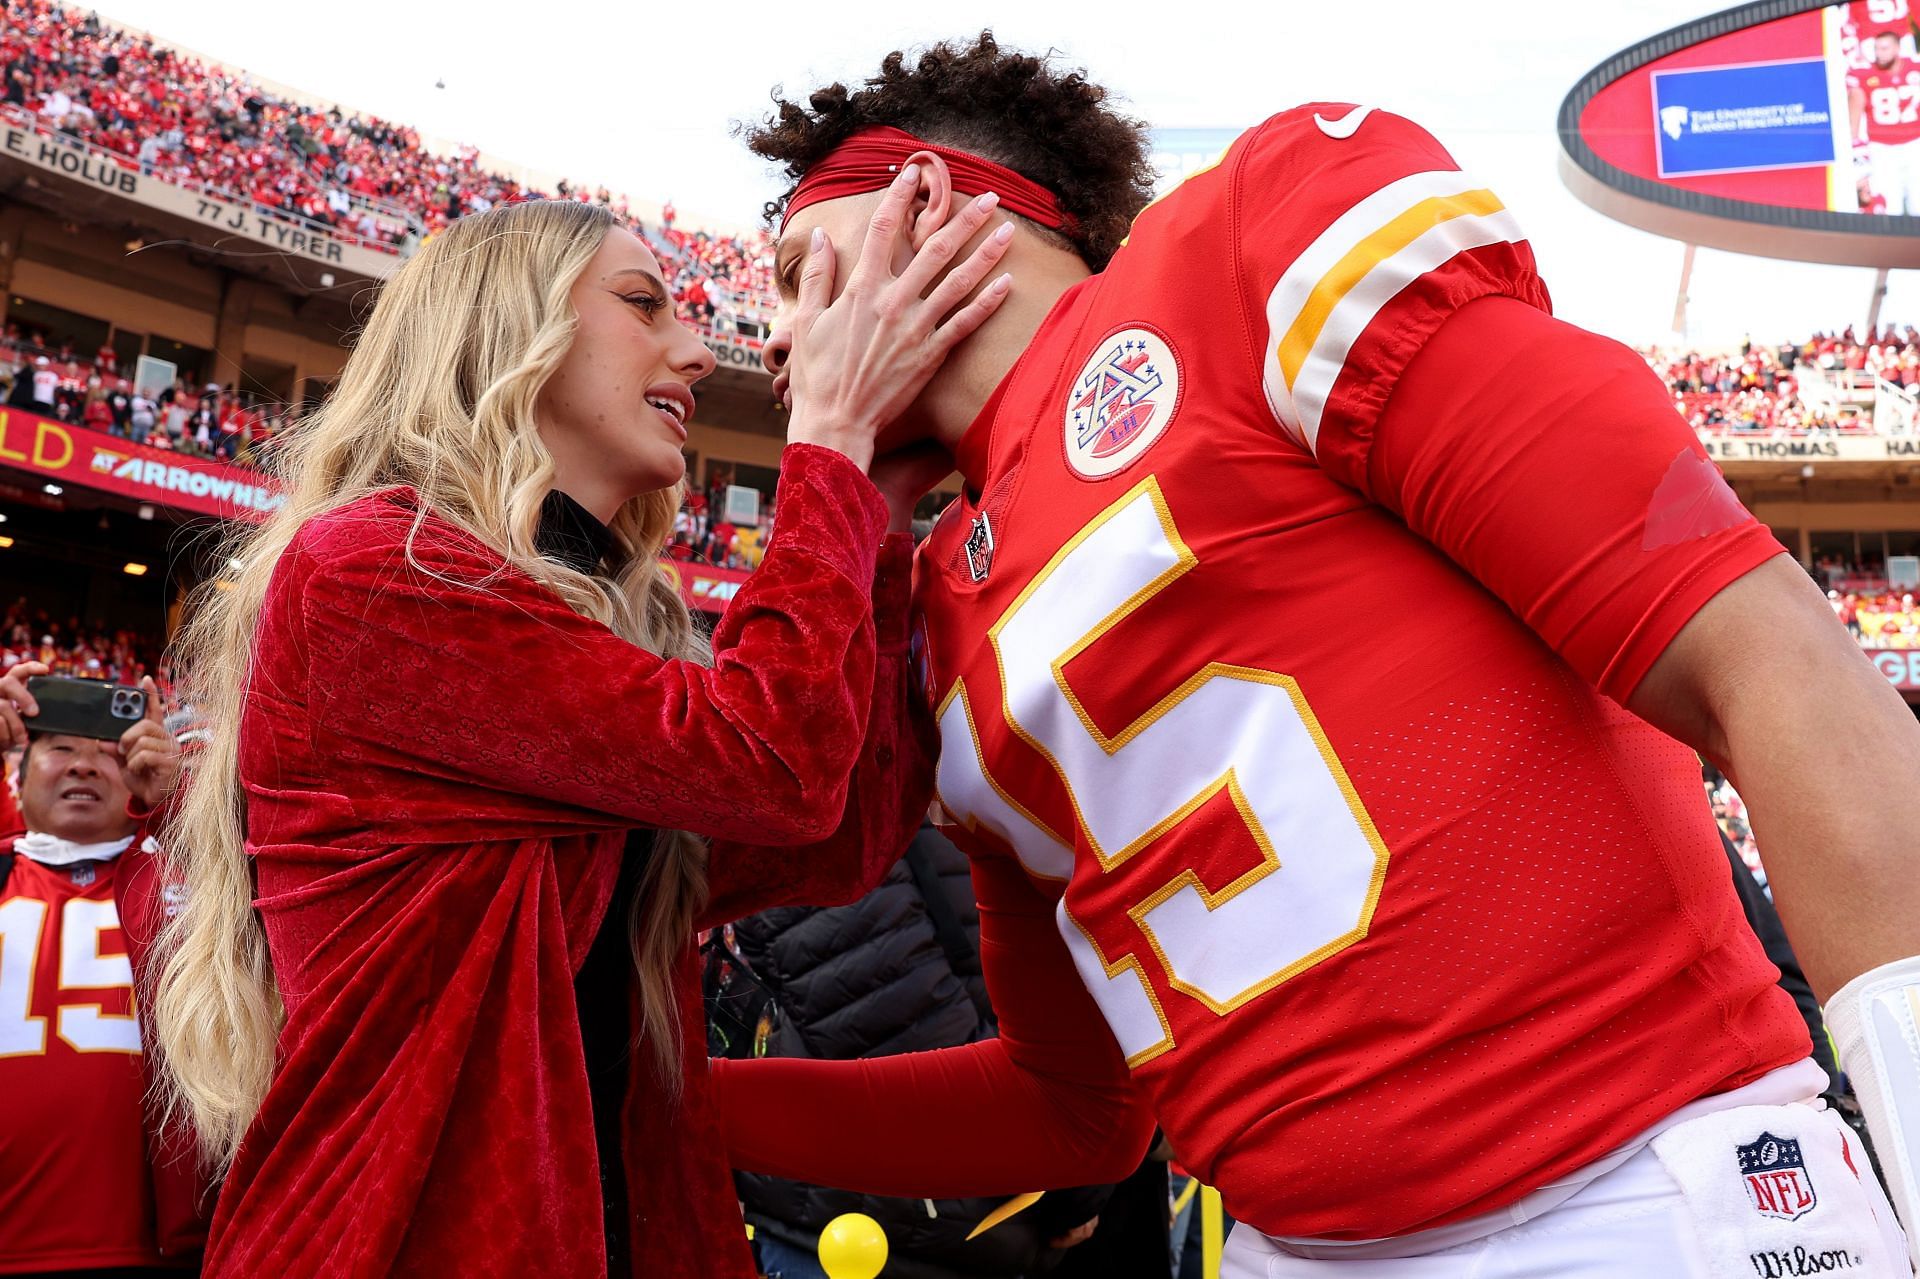 Patrick Mahomes, Stats, Contract, & Wife